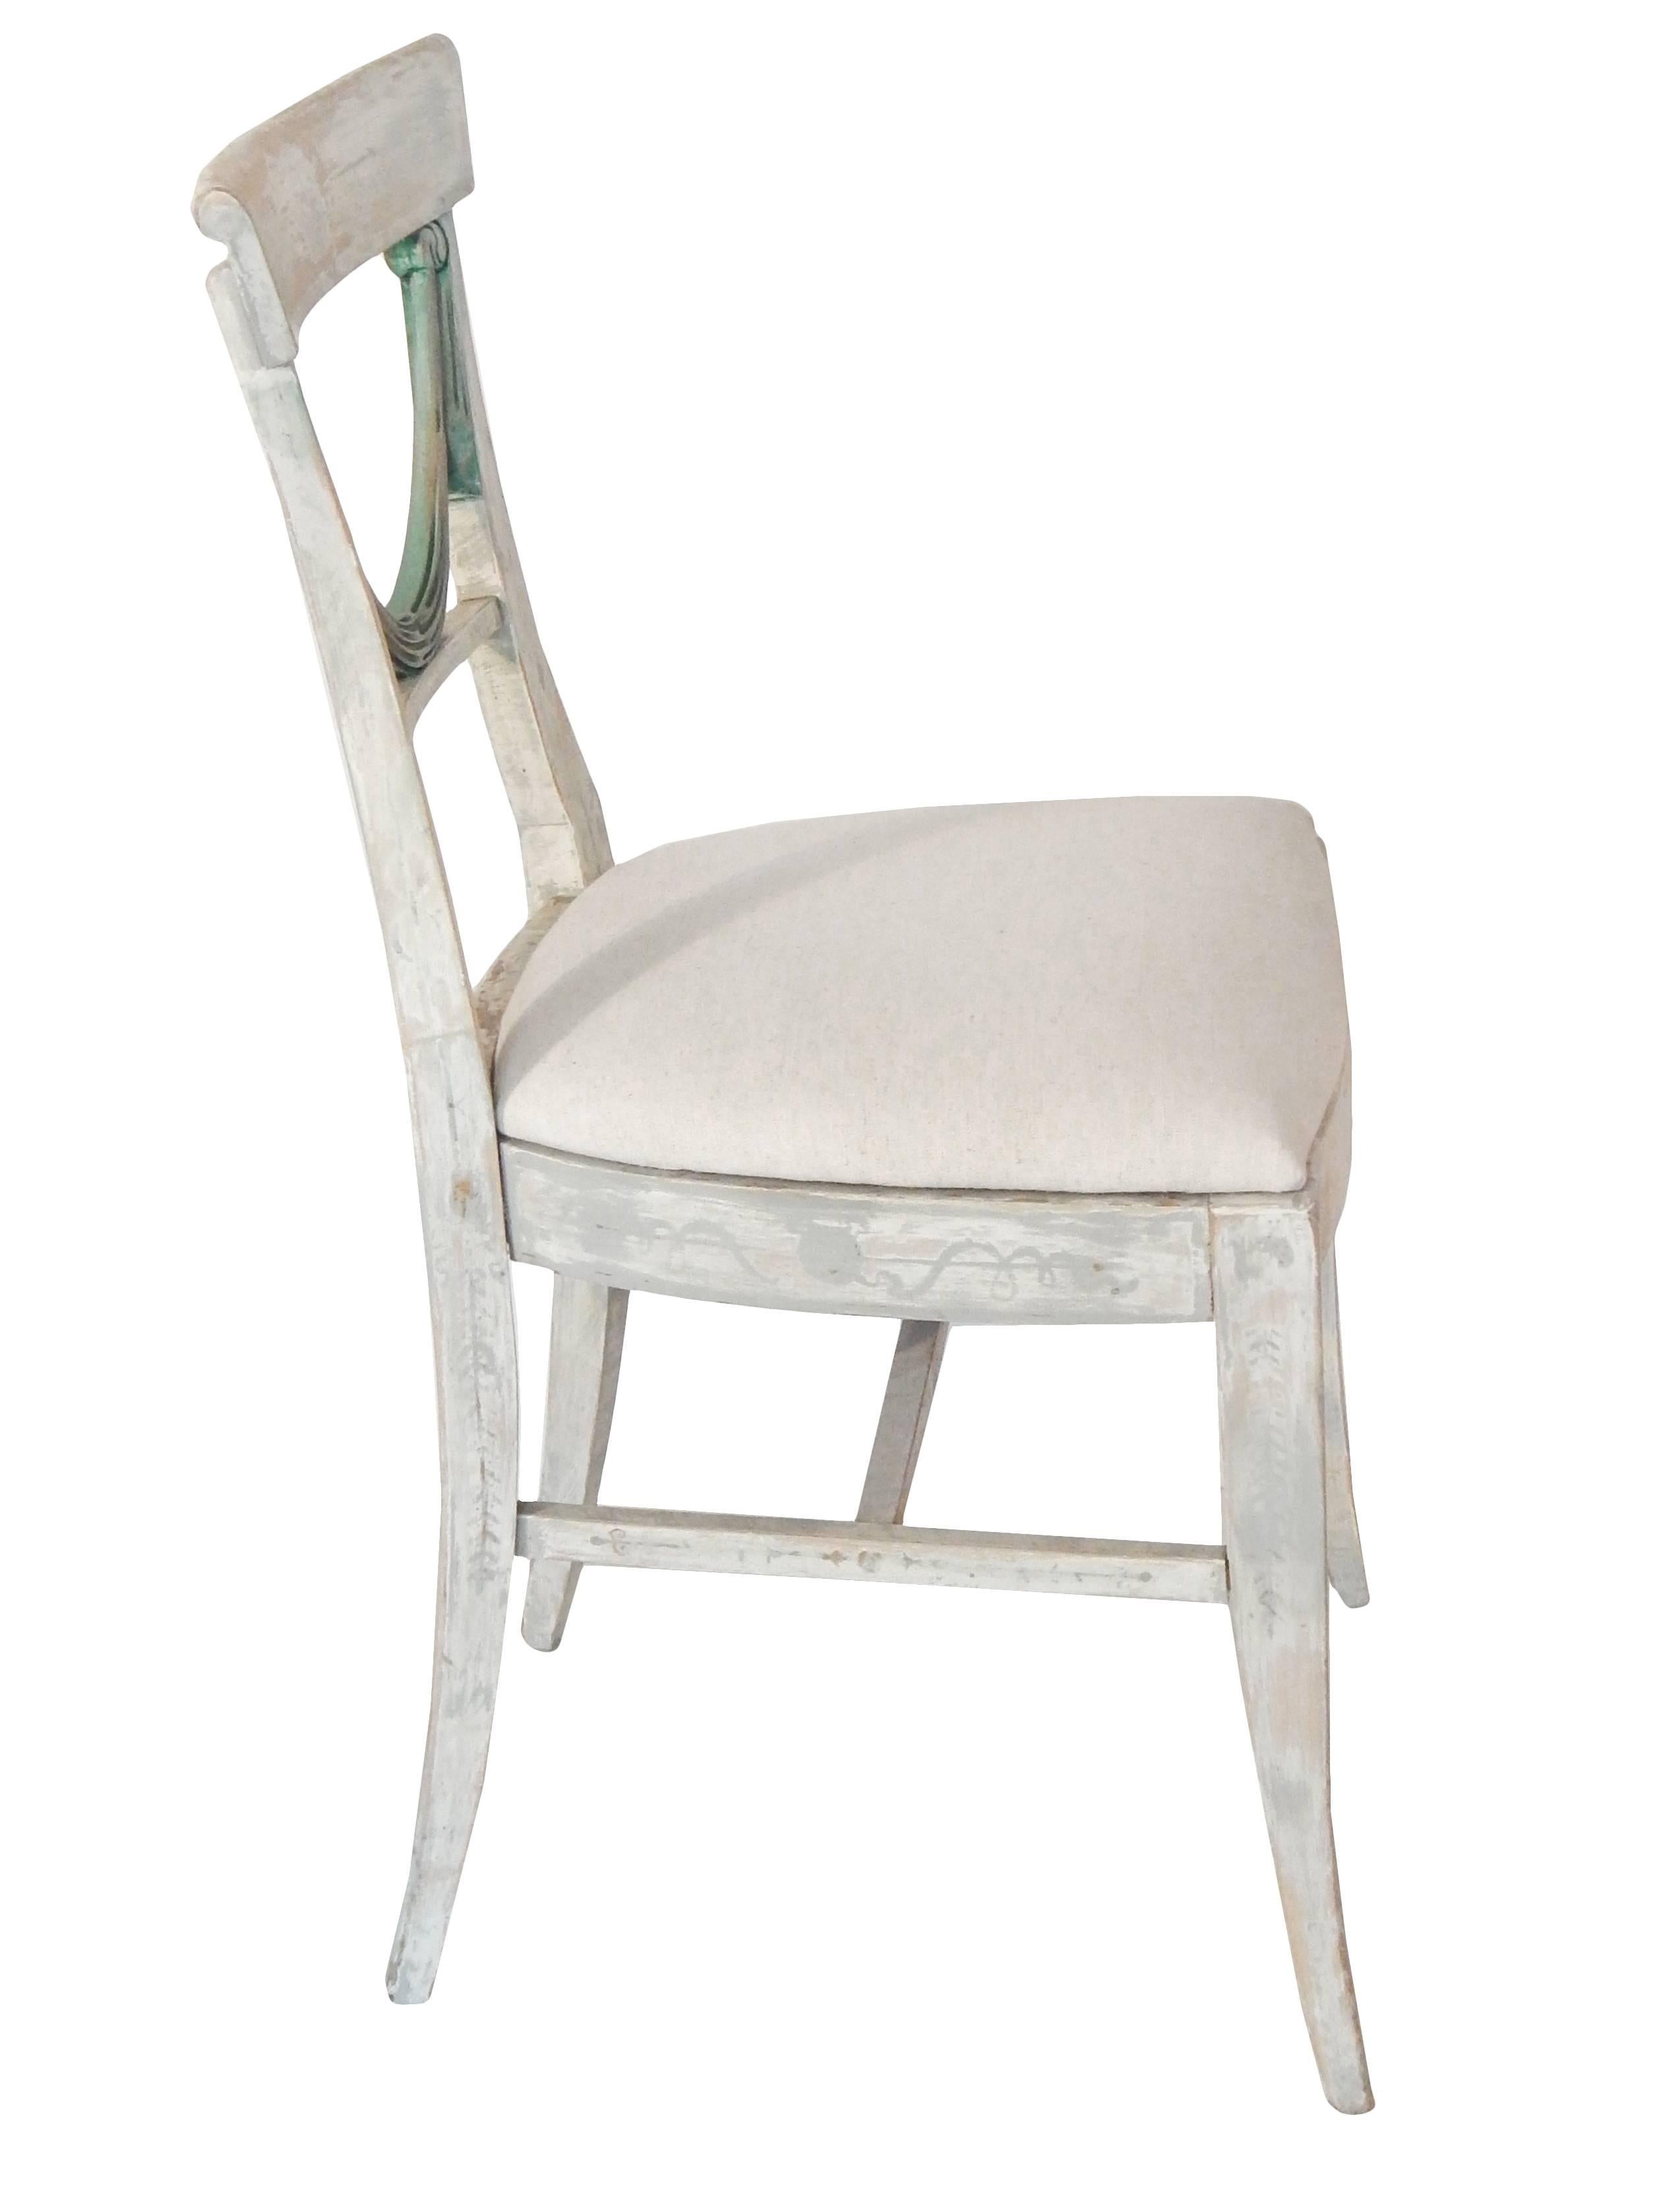 Set of Four Swedish Dining Chairs In Good Condition For Sale In Bridgehampton, NY